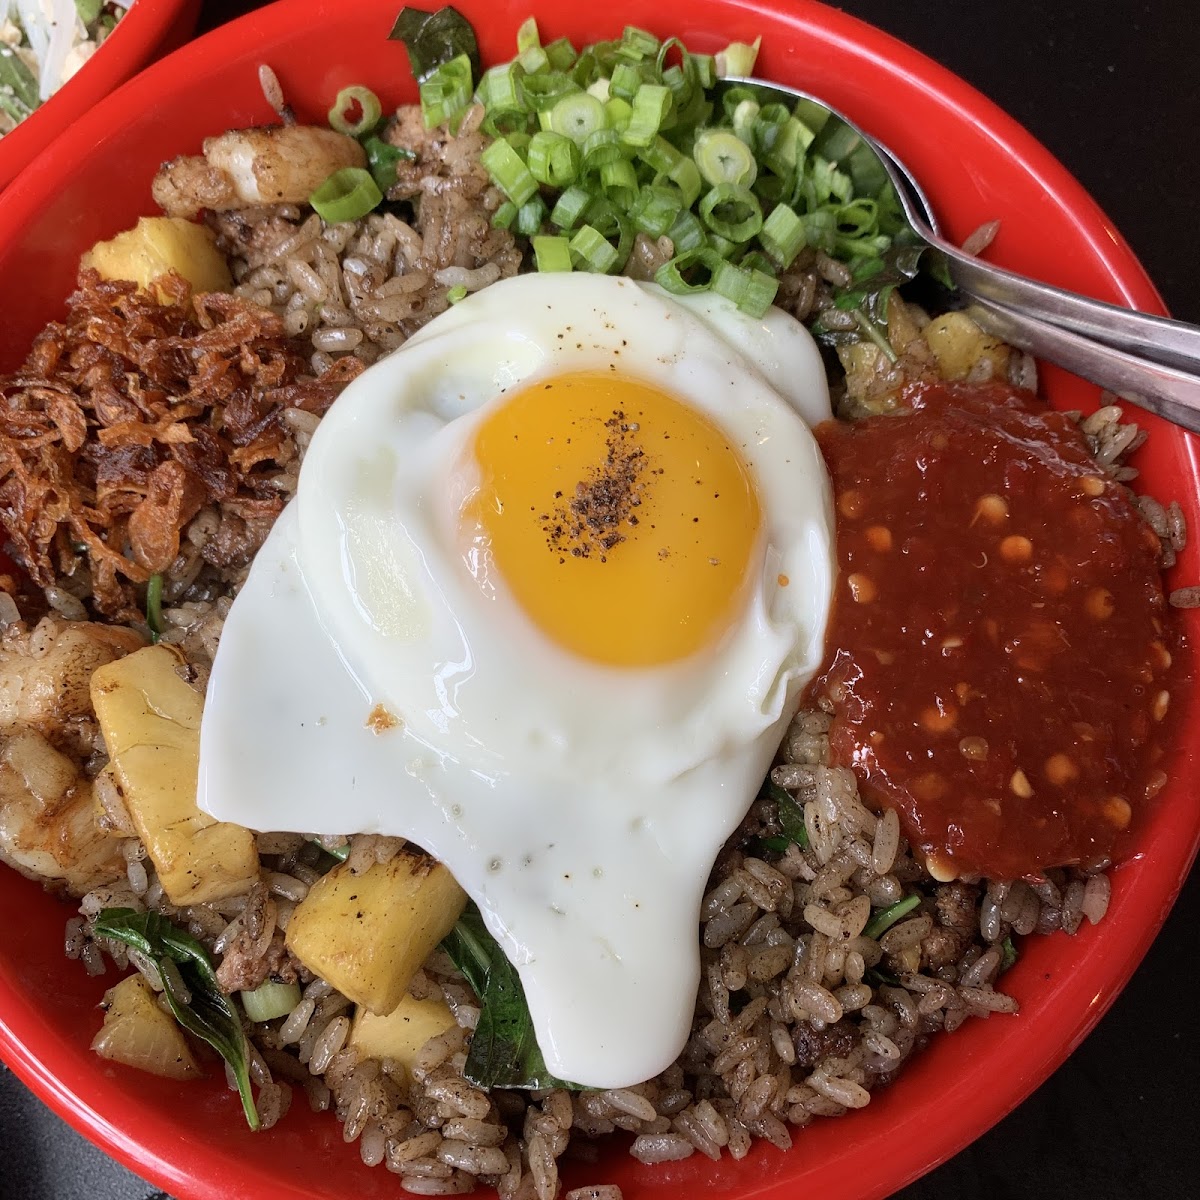 indonesian fried rice